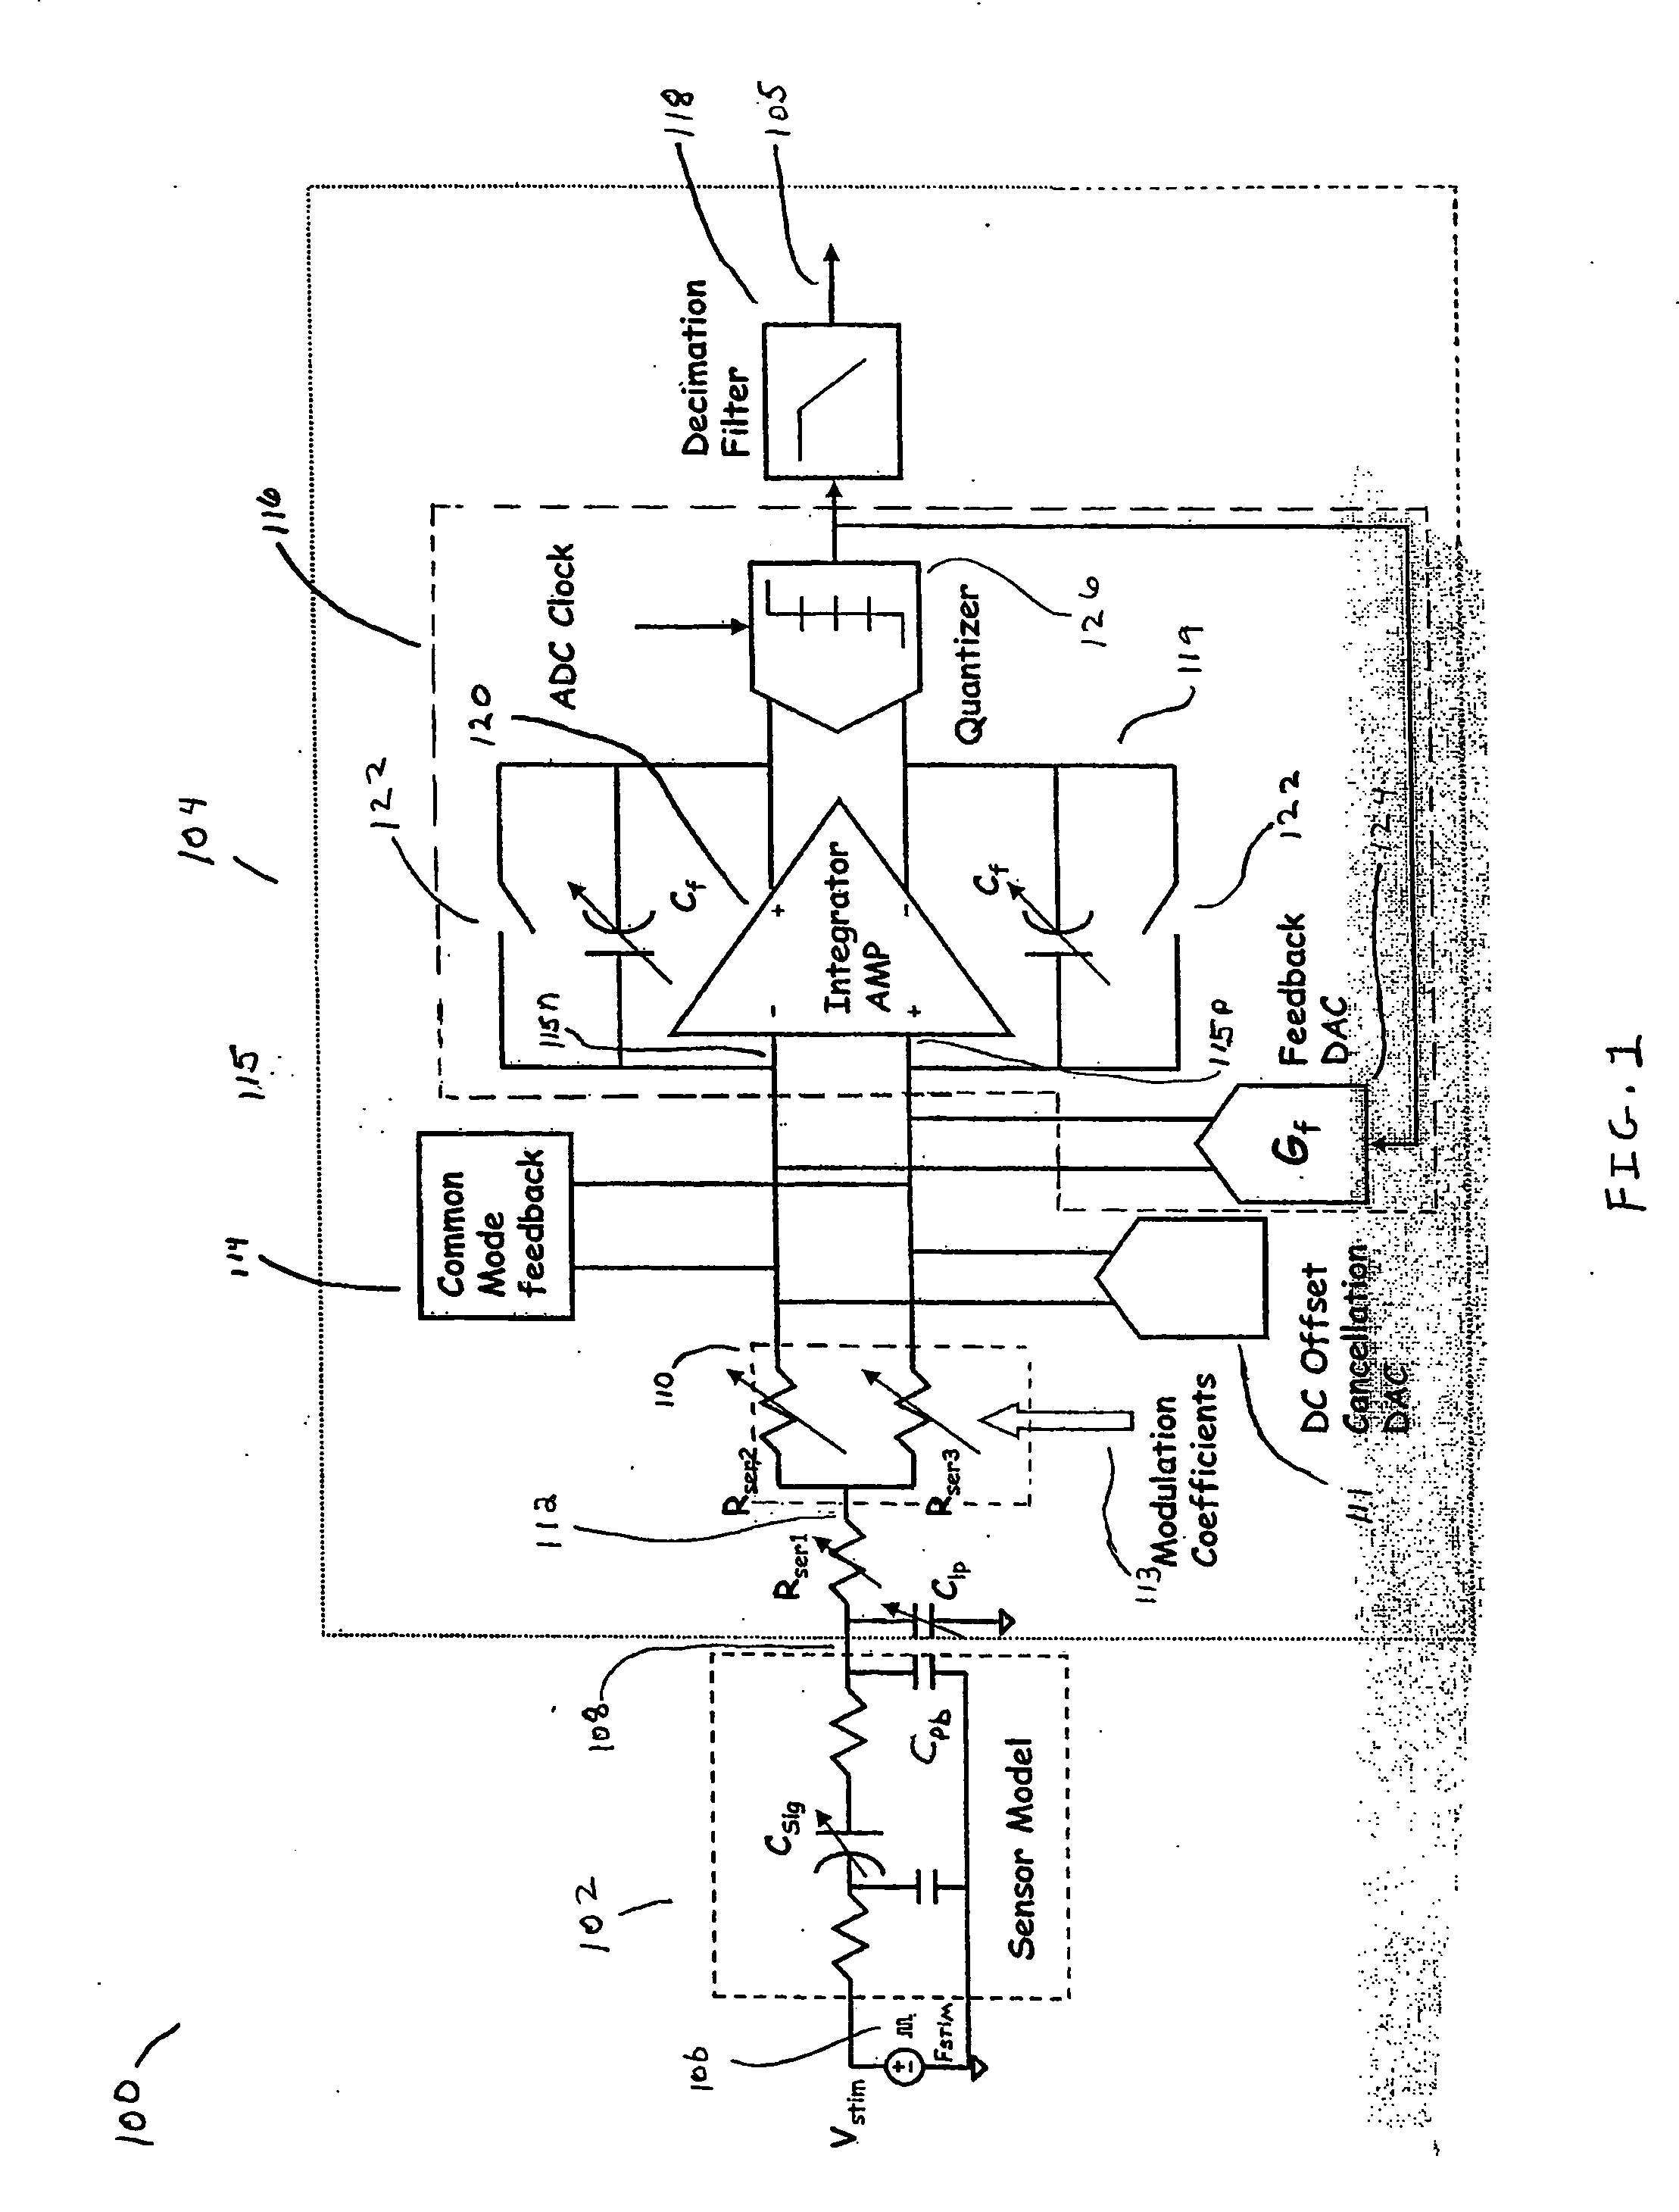 Method and system for charge sensing with variable gain, offset compensation, and demodulation